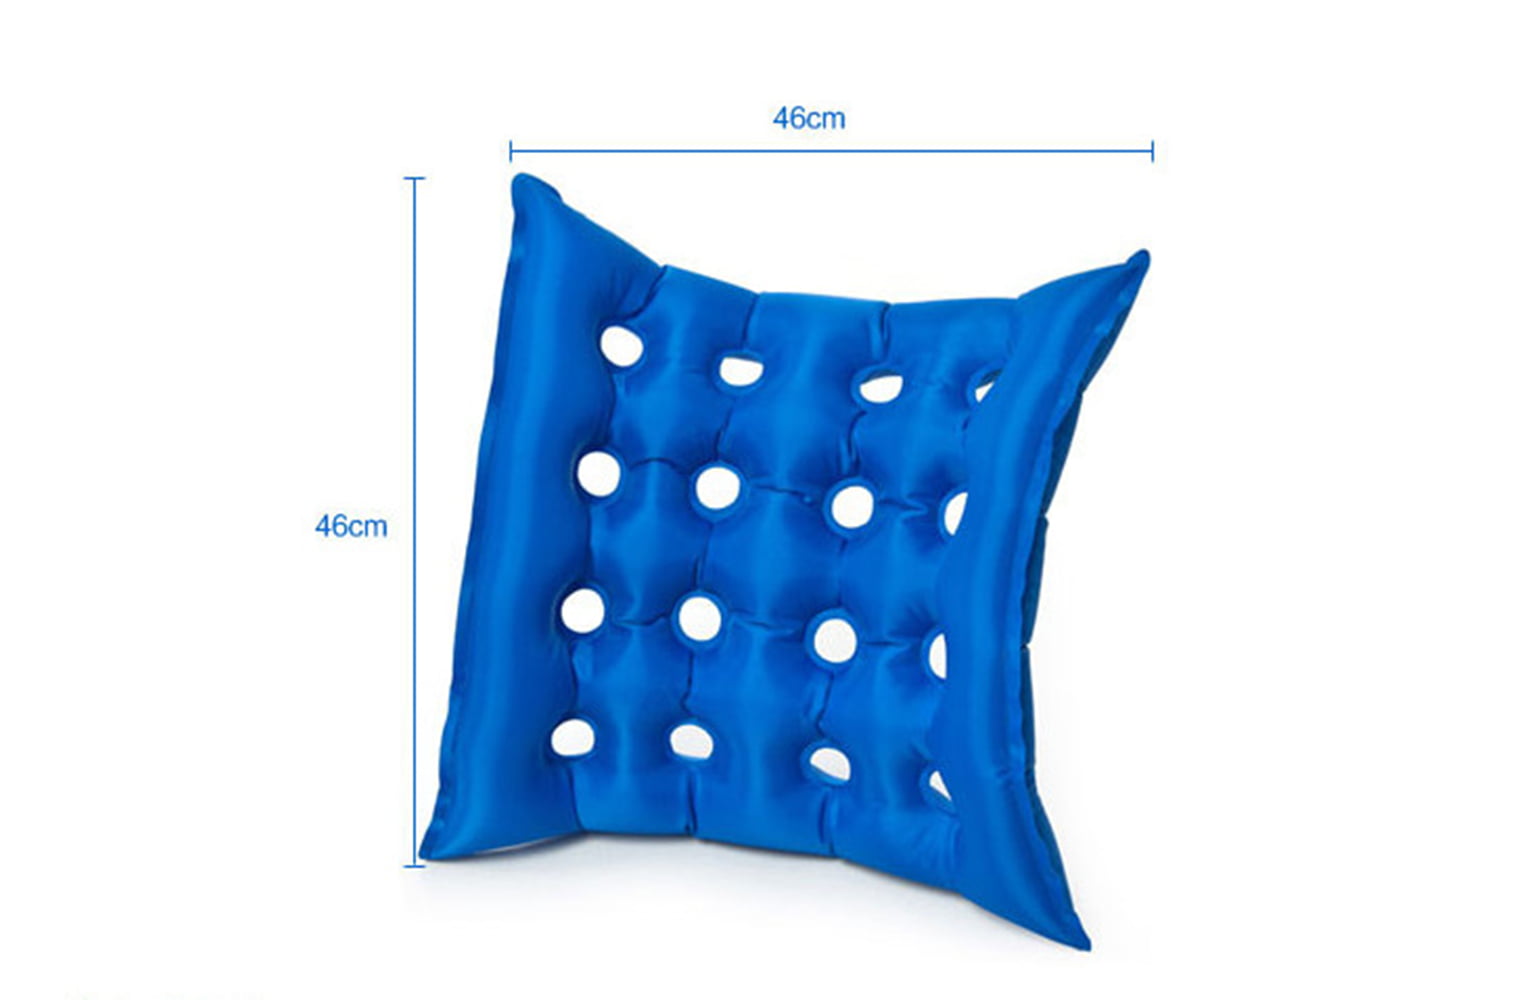  CHEOTIME Waffle Cushion for Pressure Sores, Bed Sore Cushions  for Butt for Elderly, Square Inflatable Seat Cushion for Chair Pressure  Sores(Dark Blue) : Health & Household